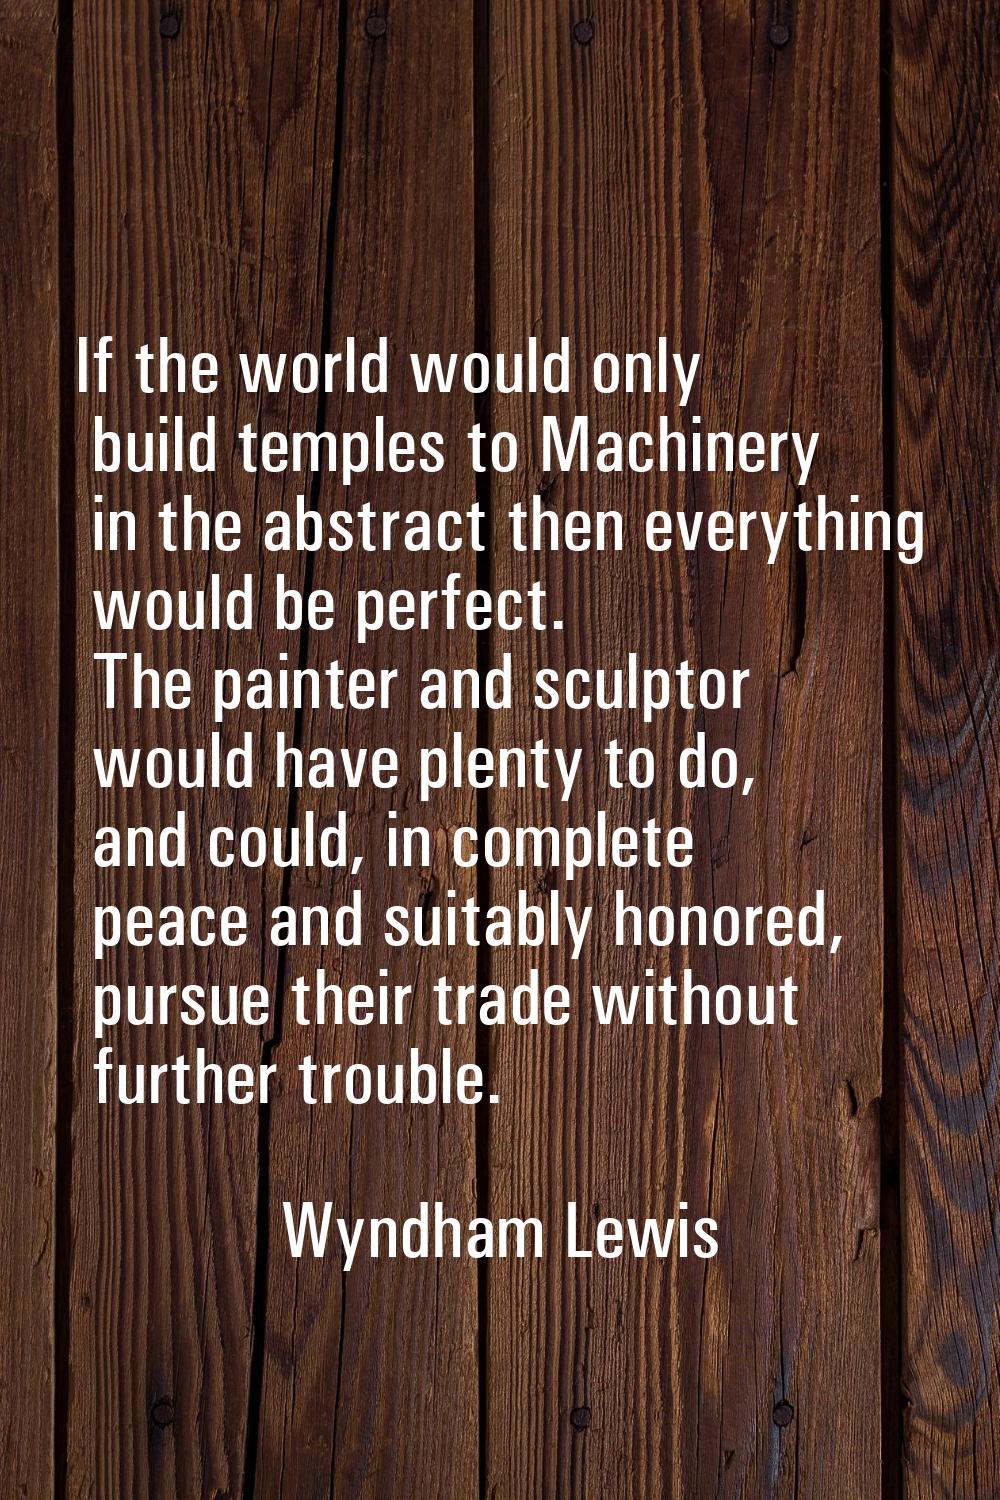 If the world would only build temples to Machinery in the abstract then everything would be perfect